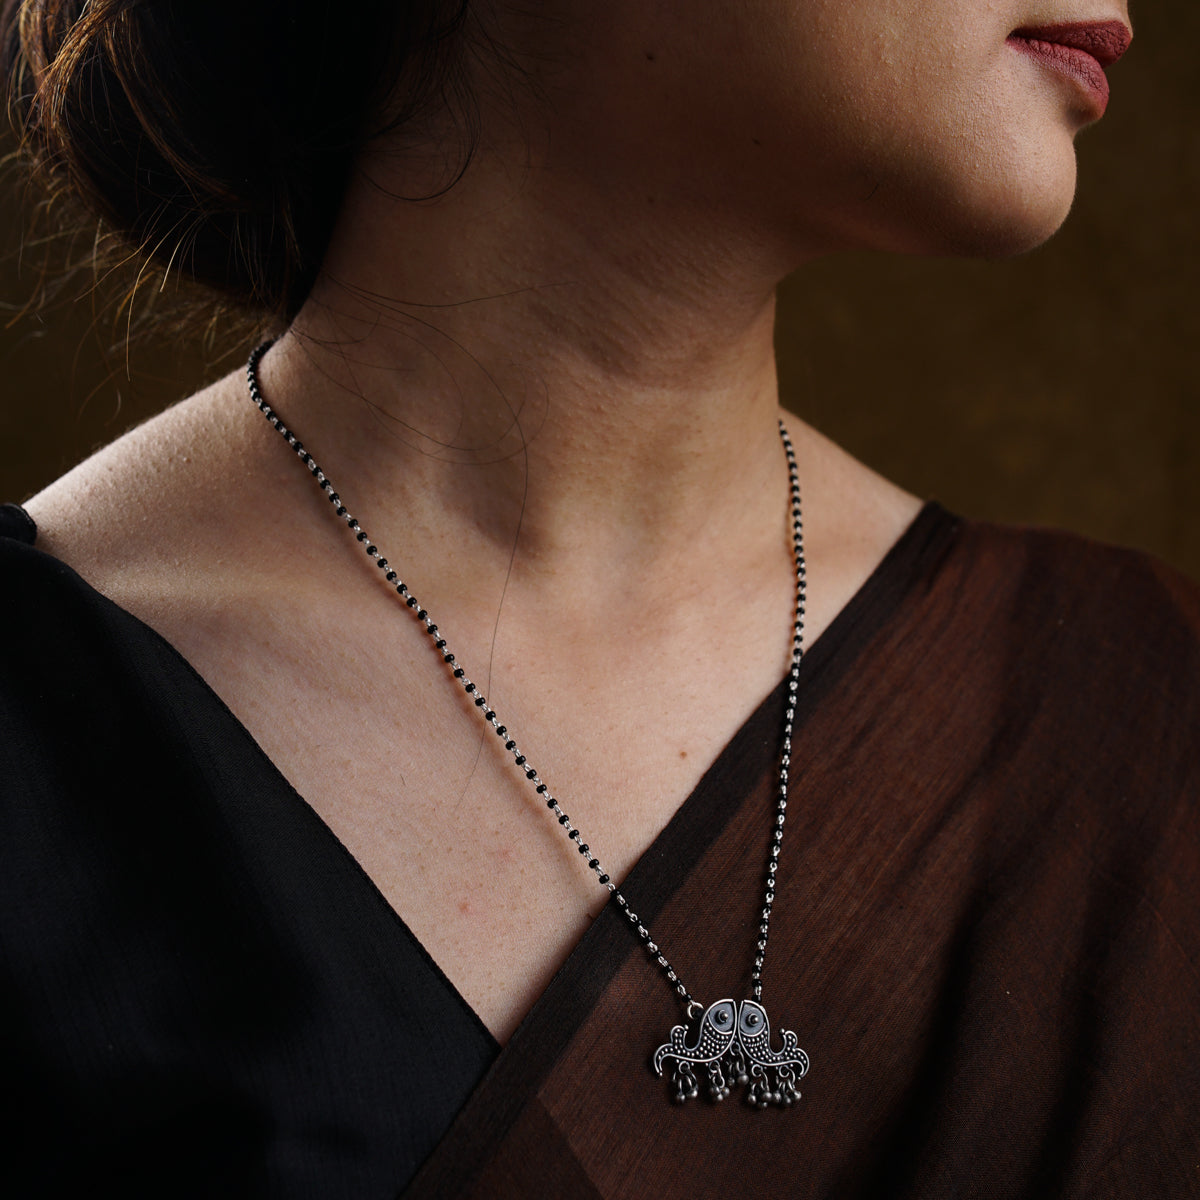 a woman wearing a necklace with two elephants on it